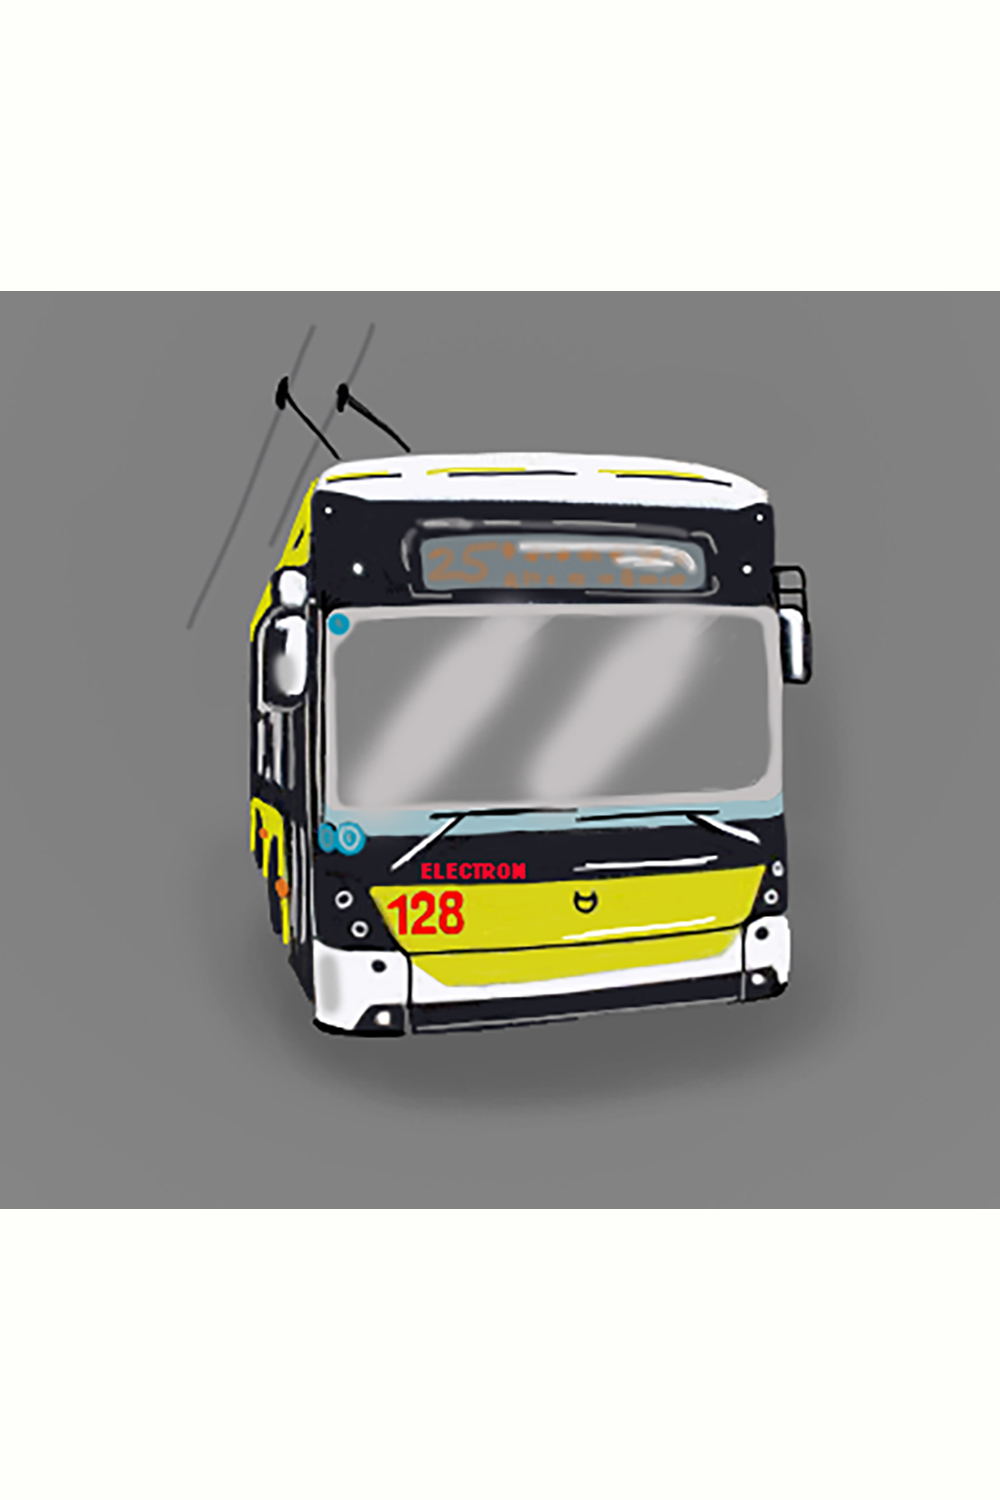 Trolleybus pinterest preview image.